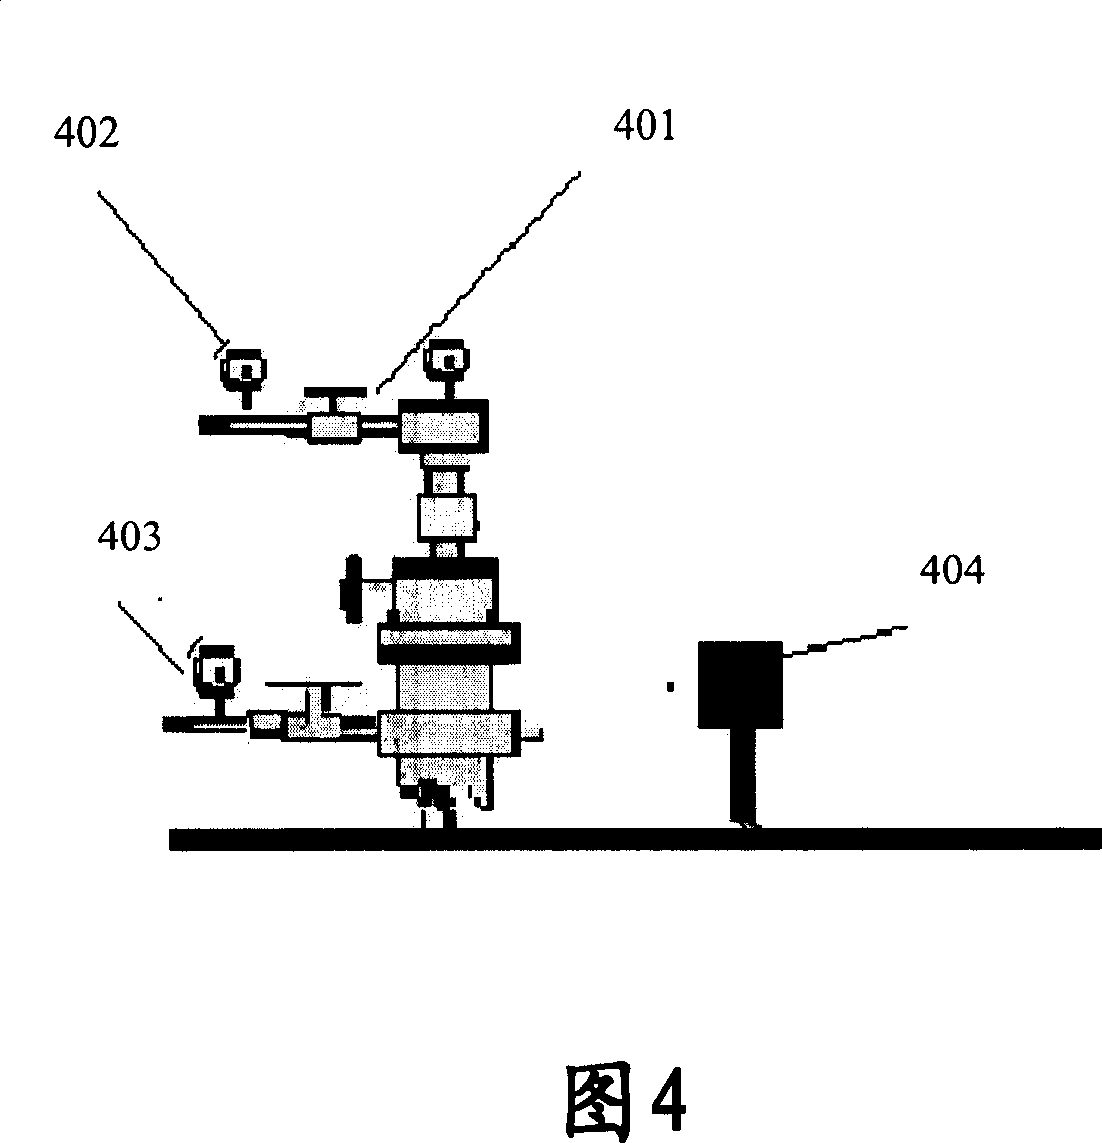 Method for metering oil production yield and analyzing and optimizing operating condition of oil well and system thereof